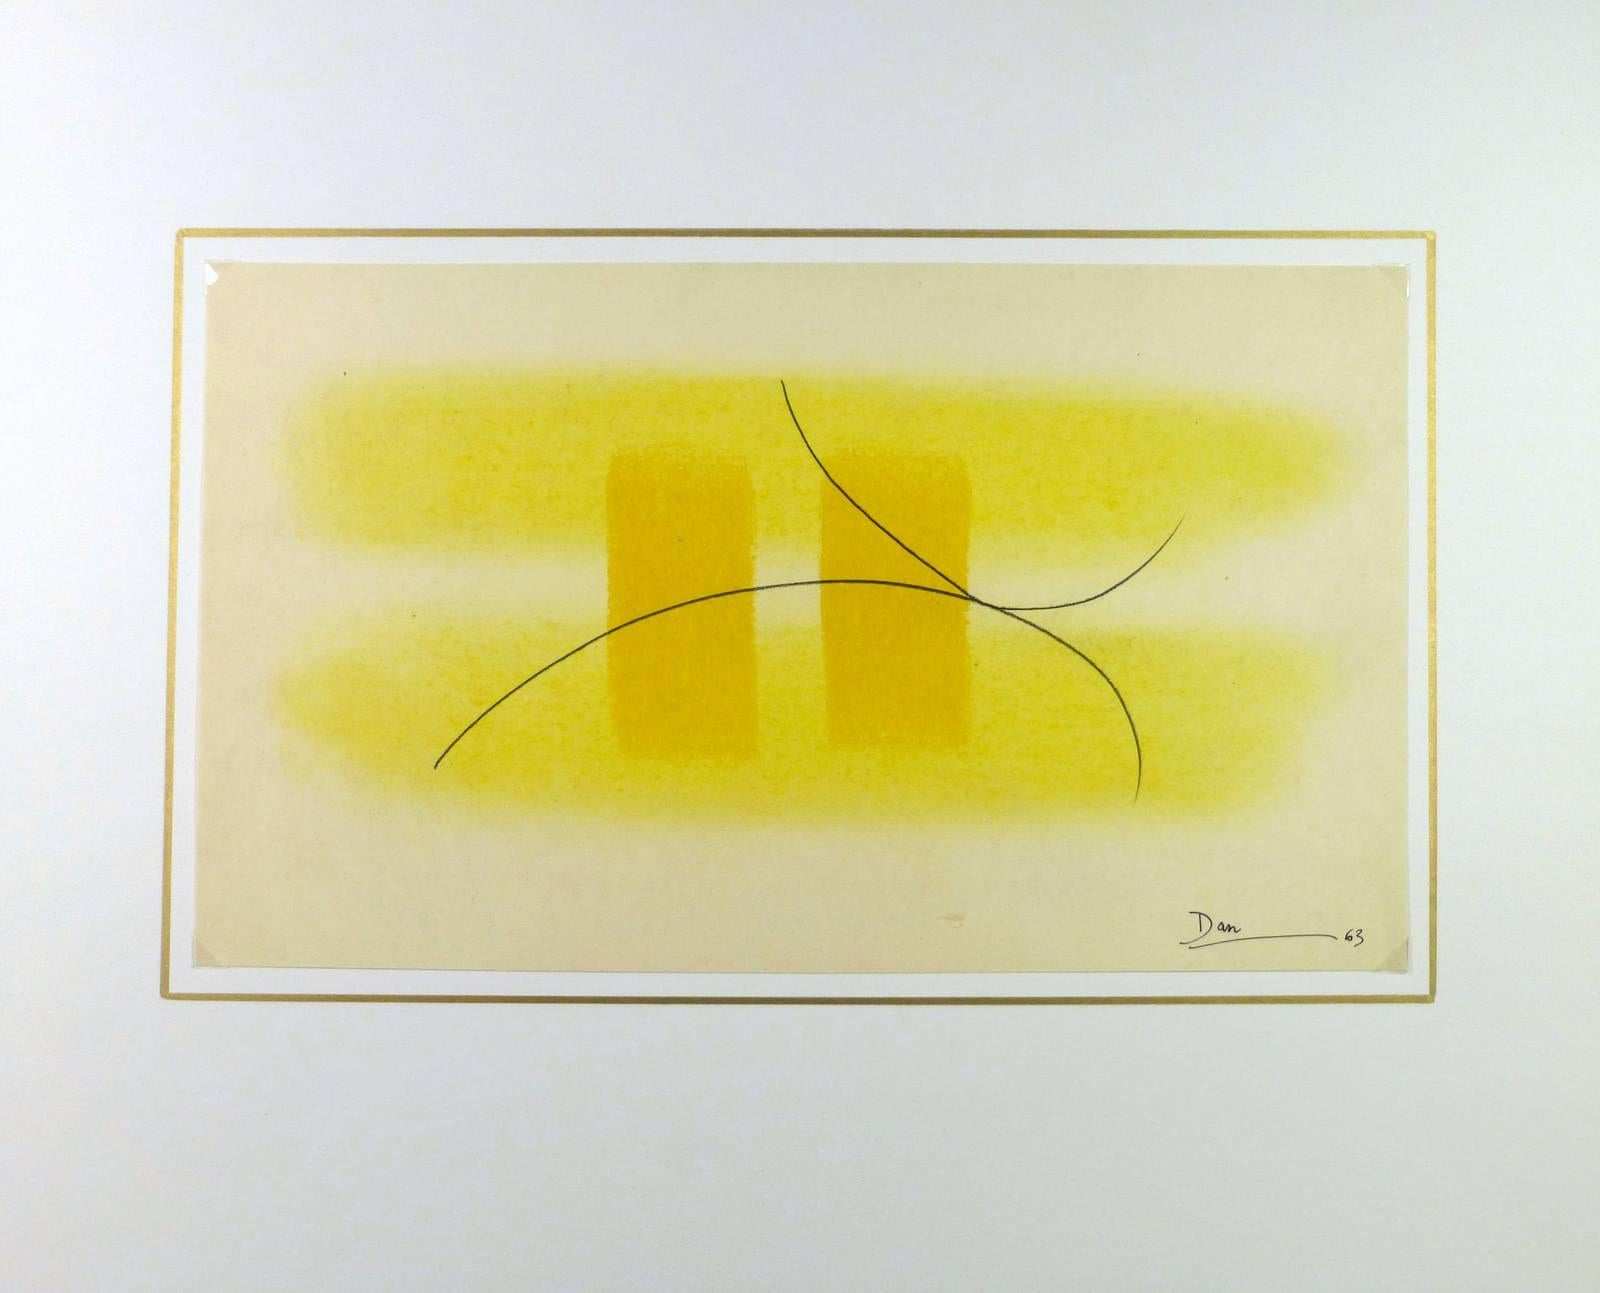 Yellow oil pastel and ink abstract by artist Dan Cambu, 1963. Signed lower right.  

Original artwork on paper displayed on a white mat with a gold border. Mat fits a standard-size frame.  Archival plastic sleeve and Certificate of Authenticity